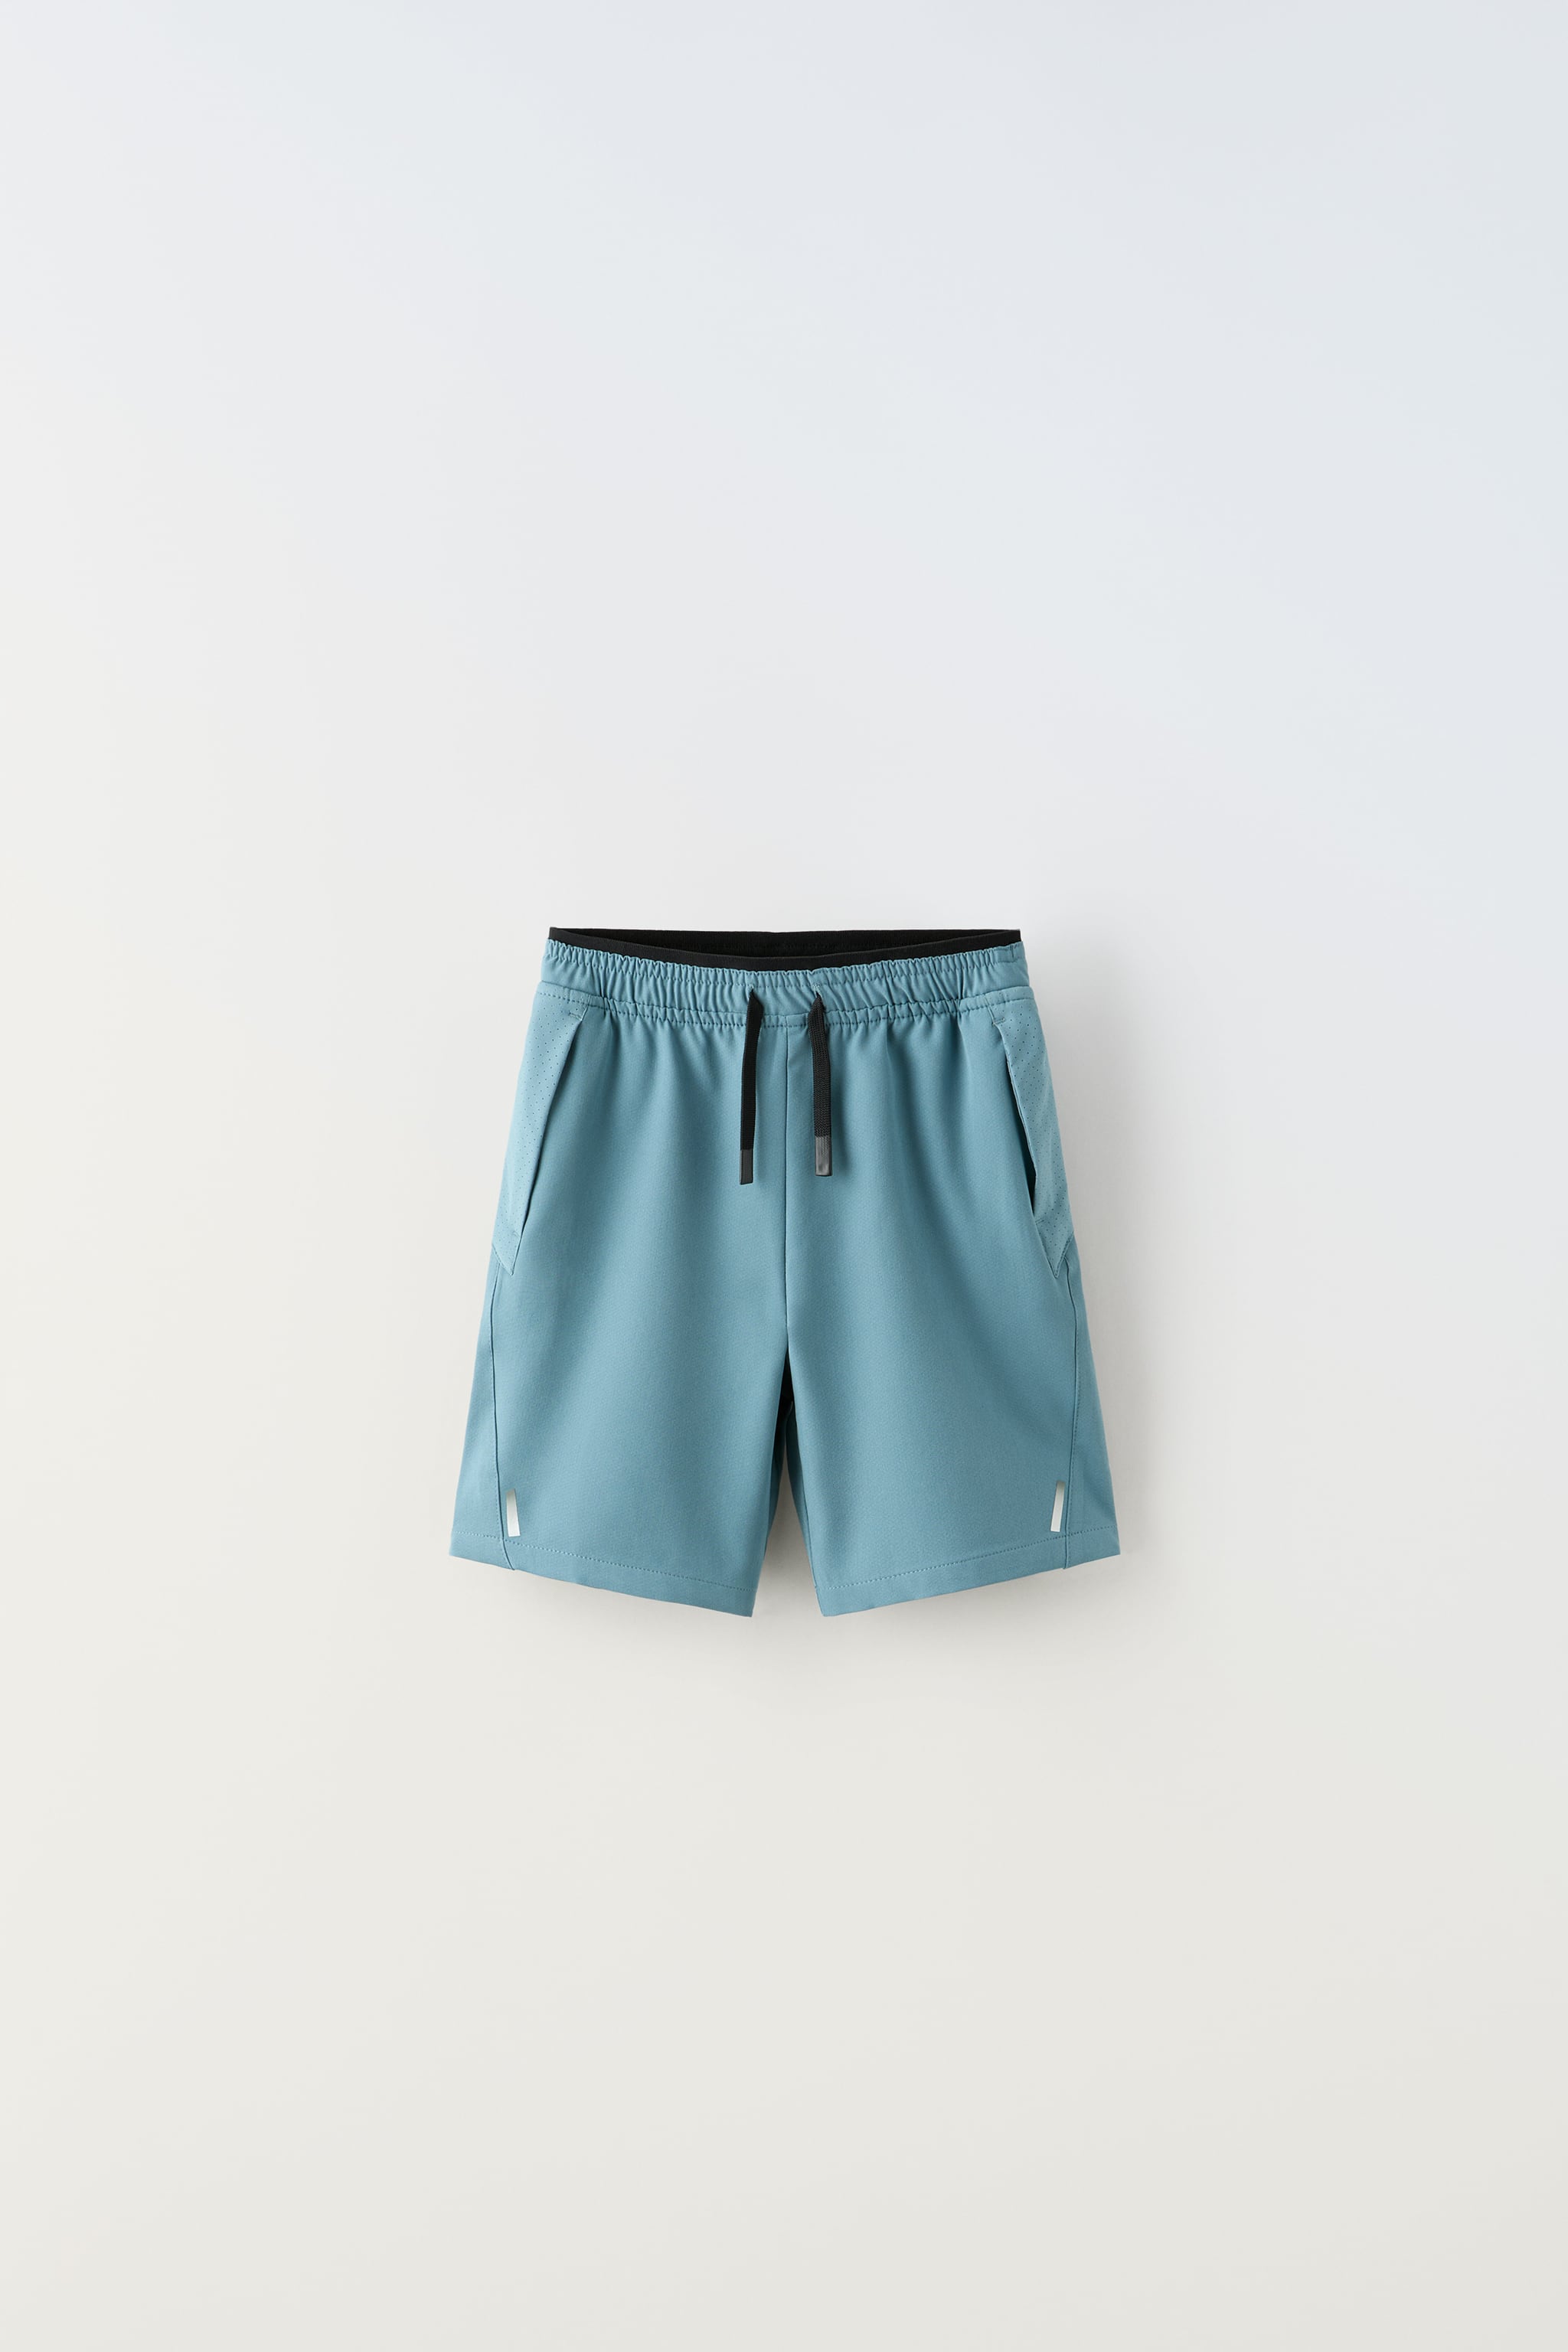 TECHNICAL ATHLETIC SHORTS